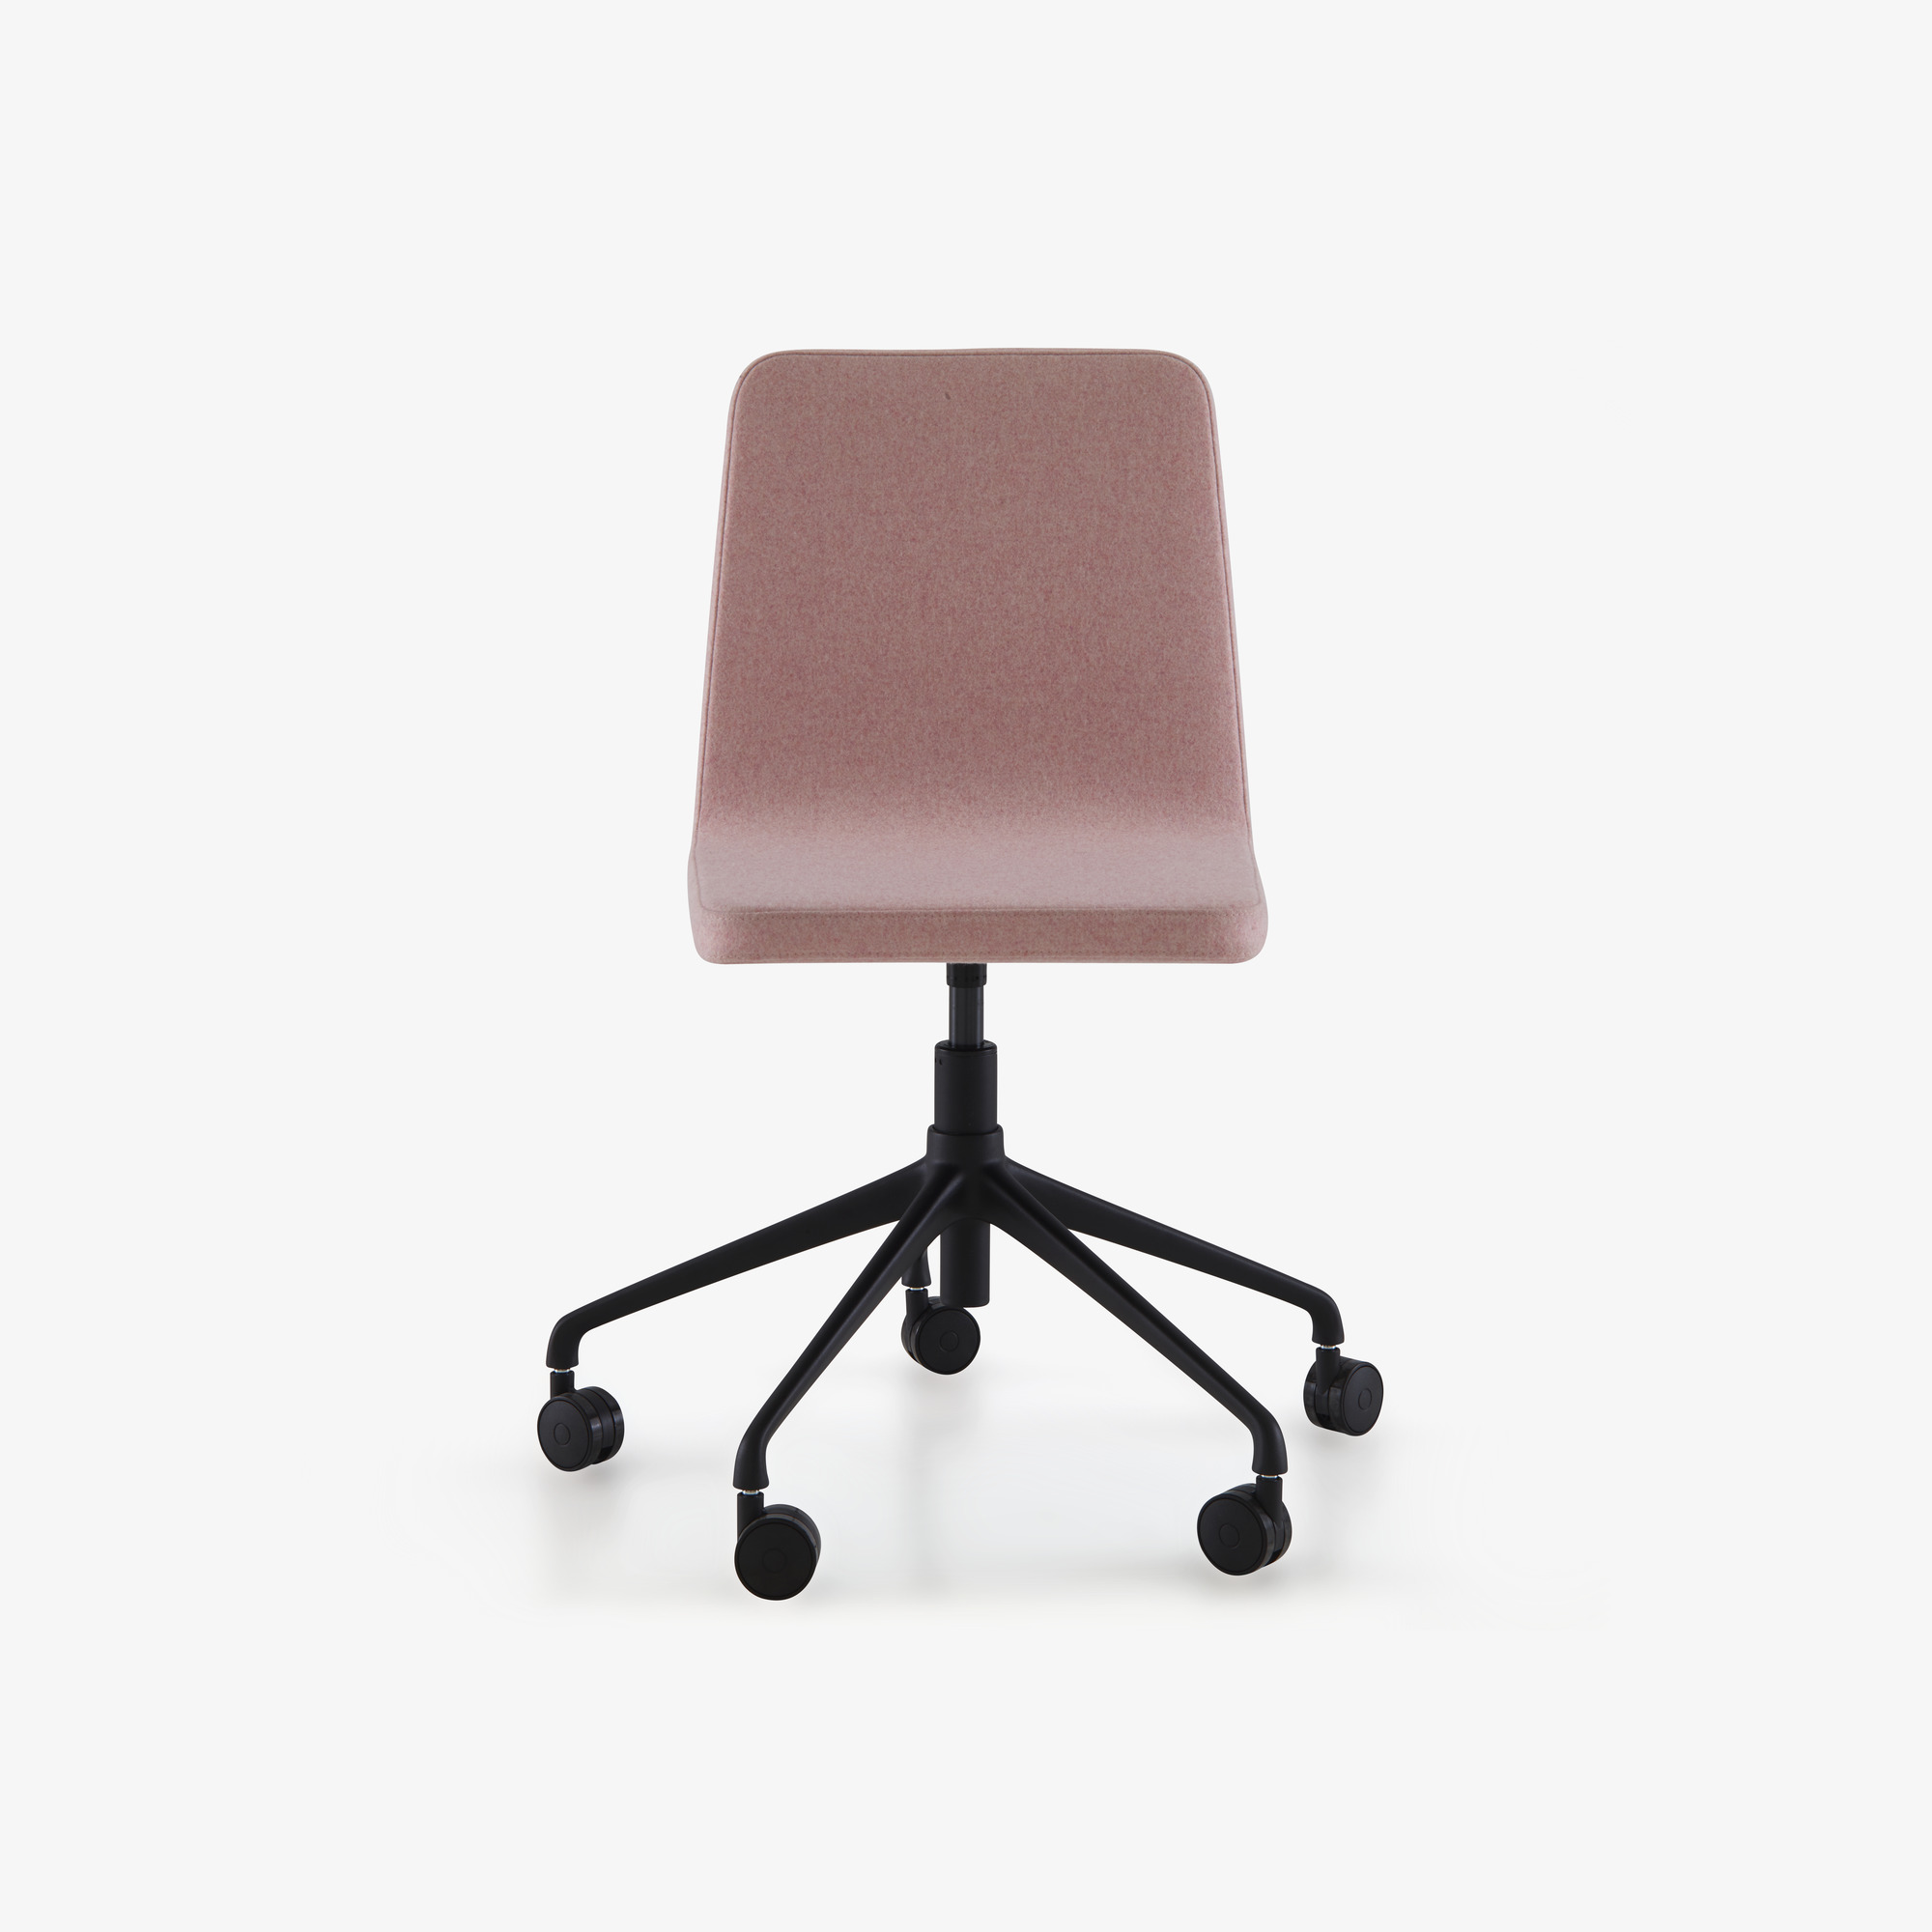 Image Desk chair set of feet with wheels 1